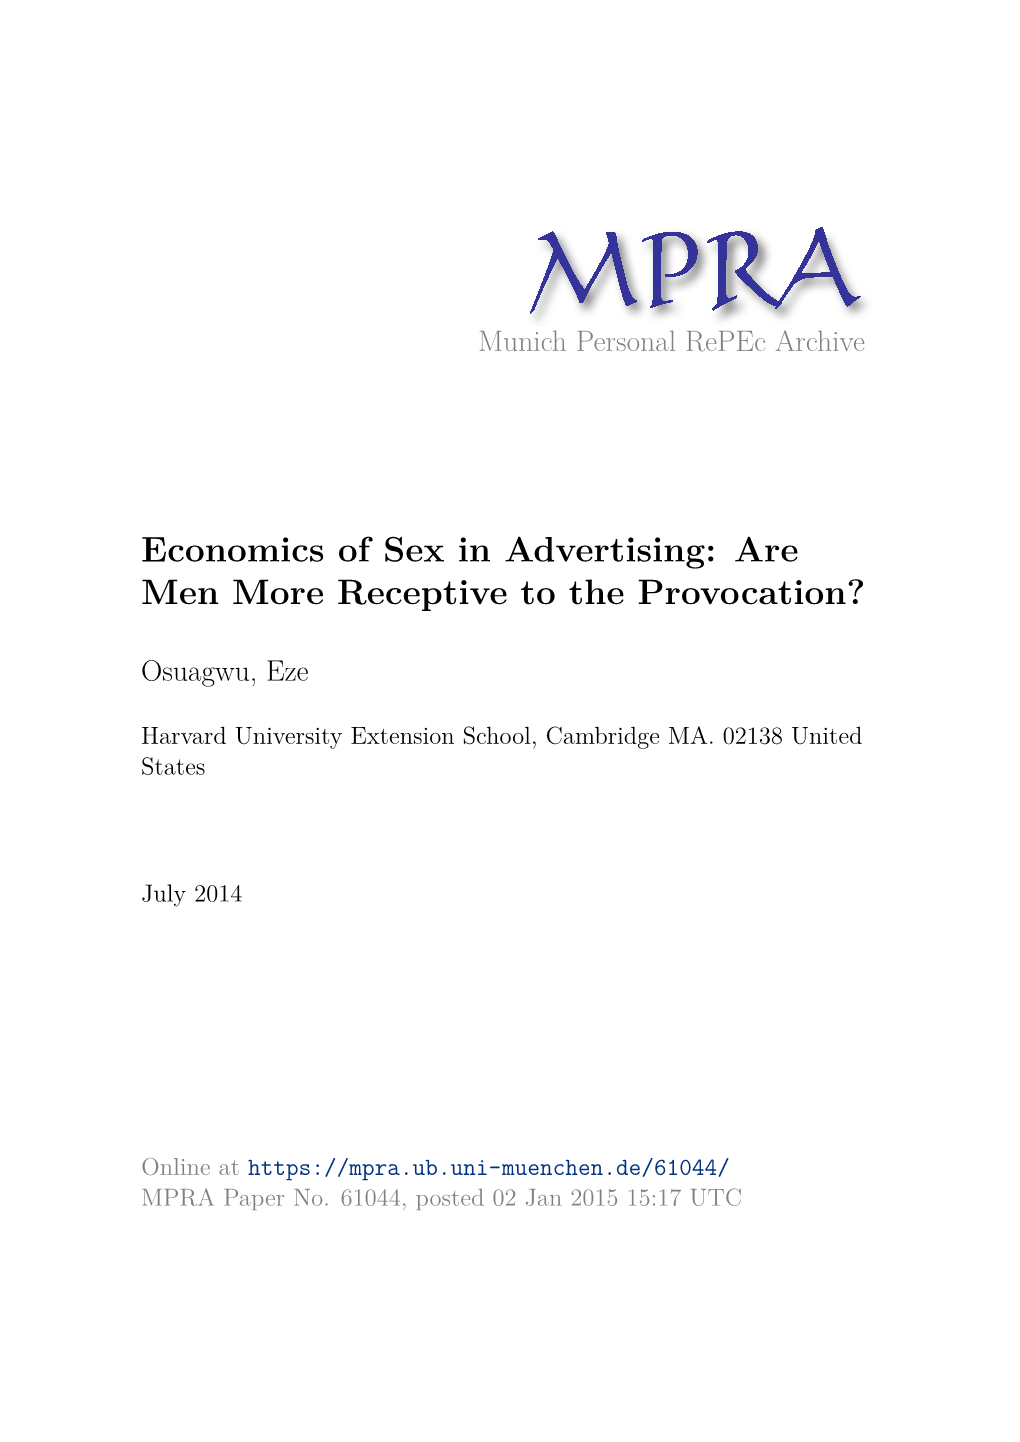 Economics of Sex in Advertising: Are Men More Receptive to the Provocation?